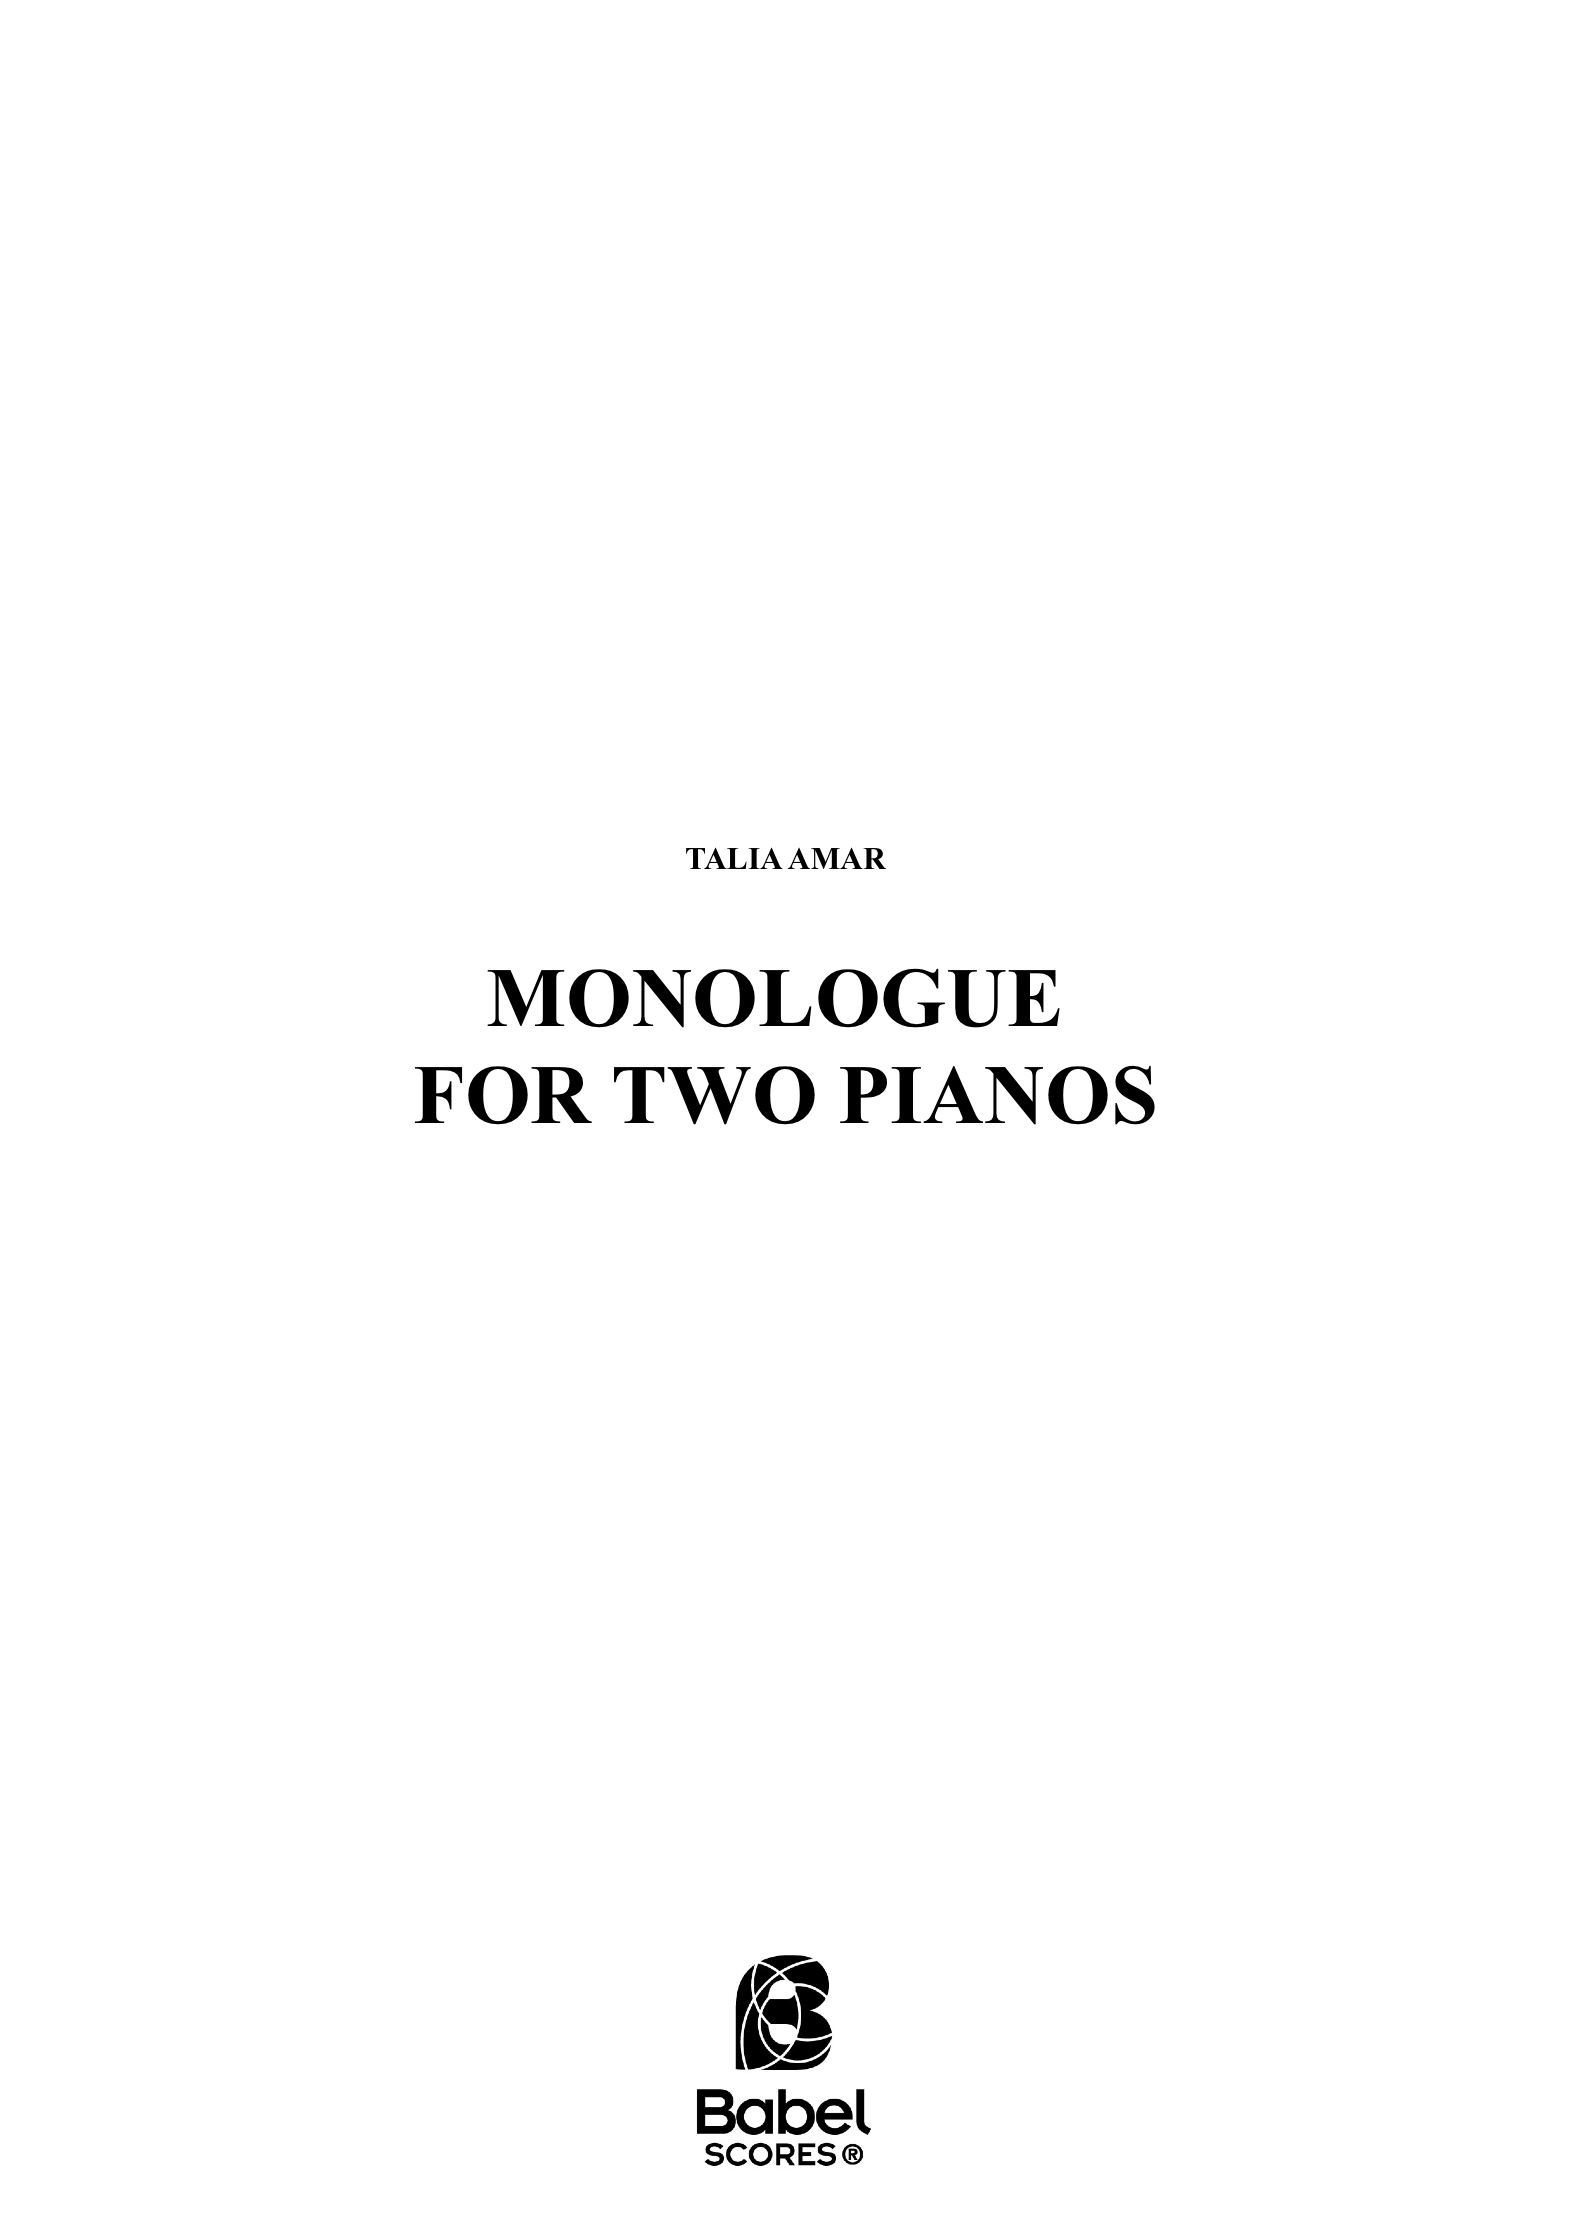 Monologue for two pianos z